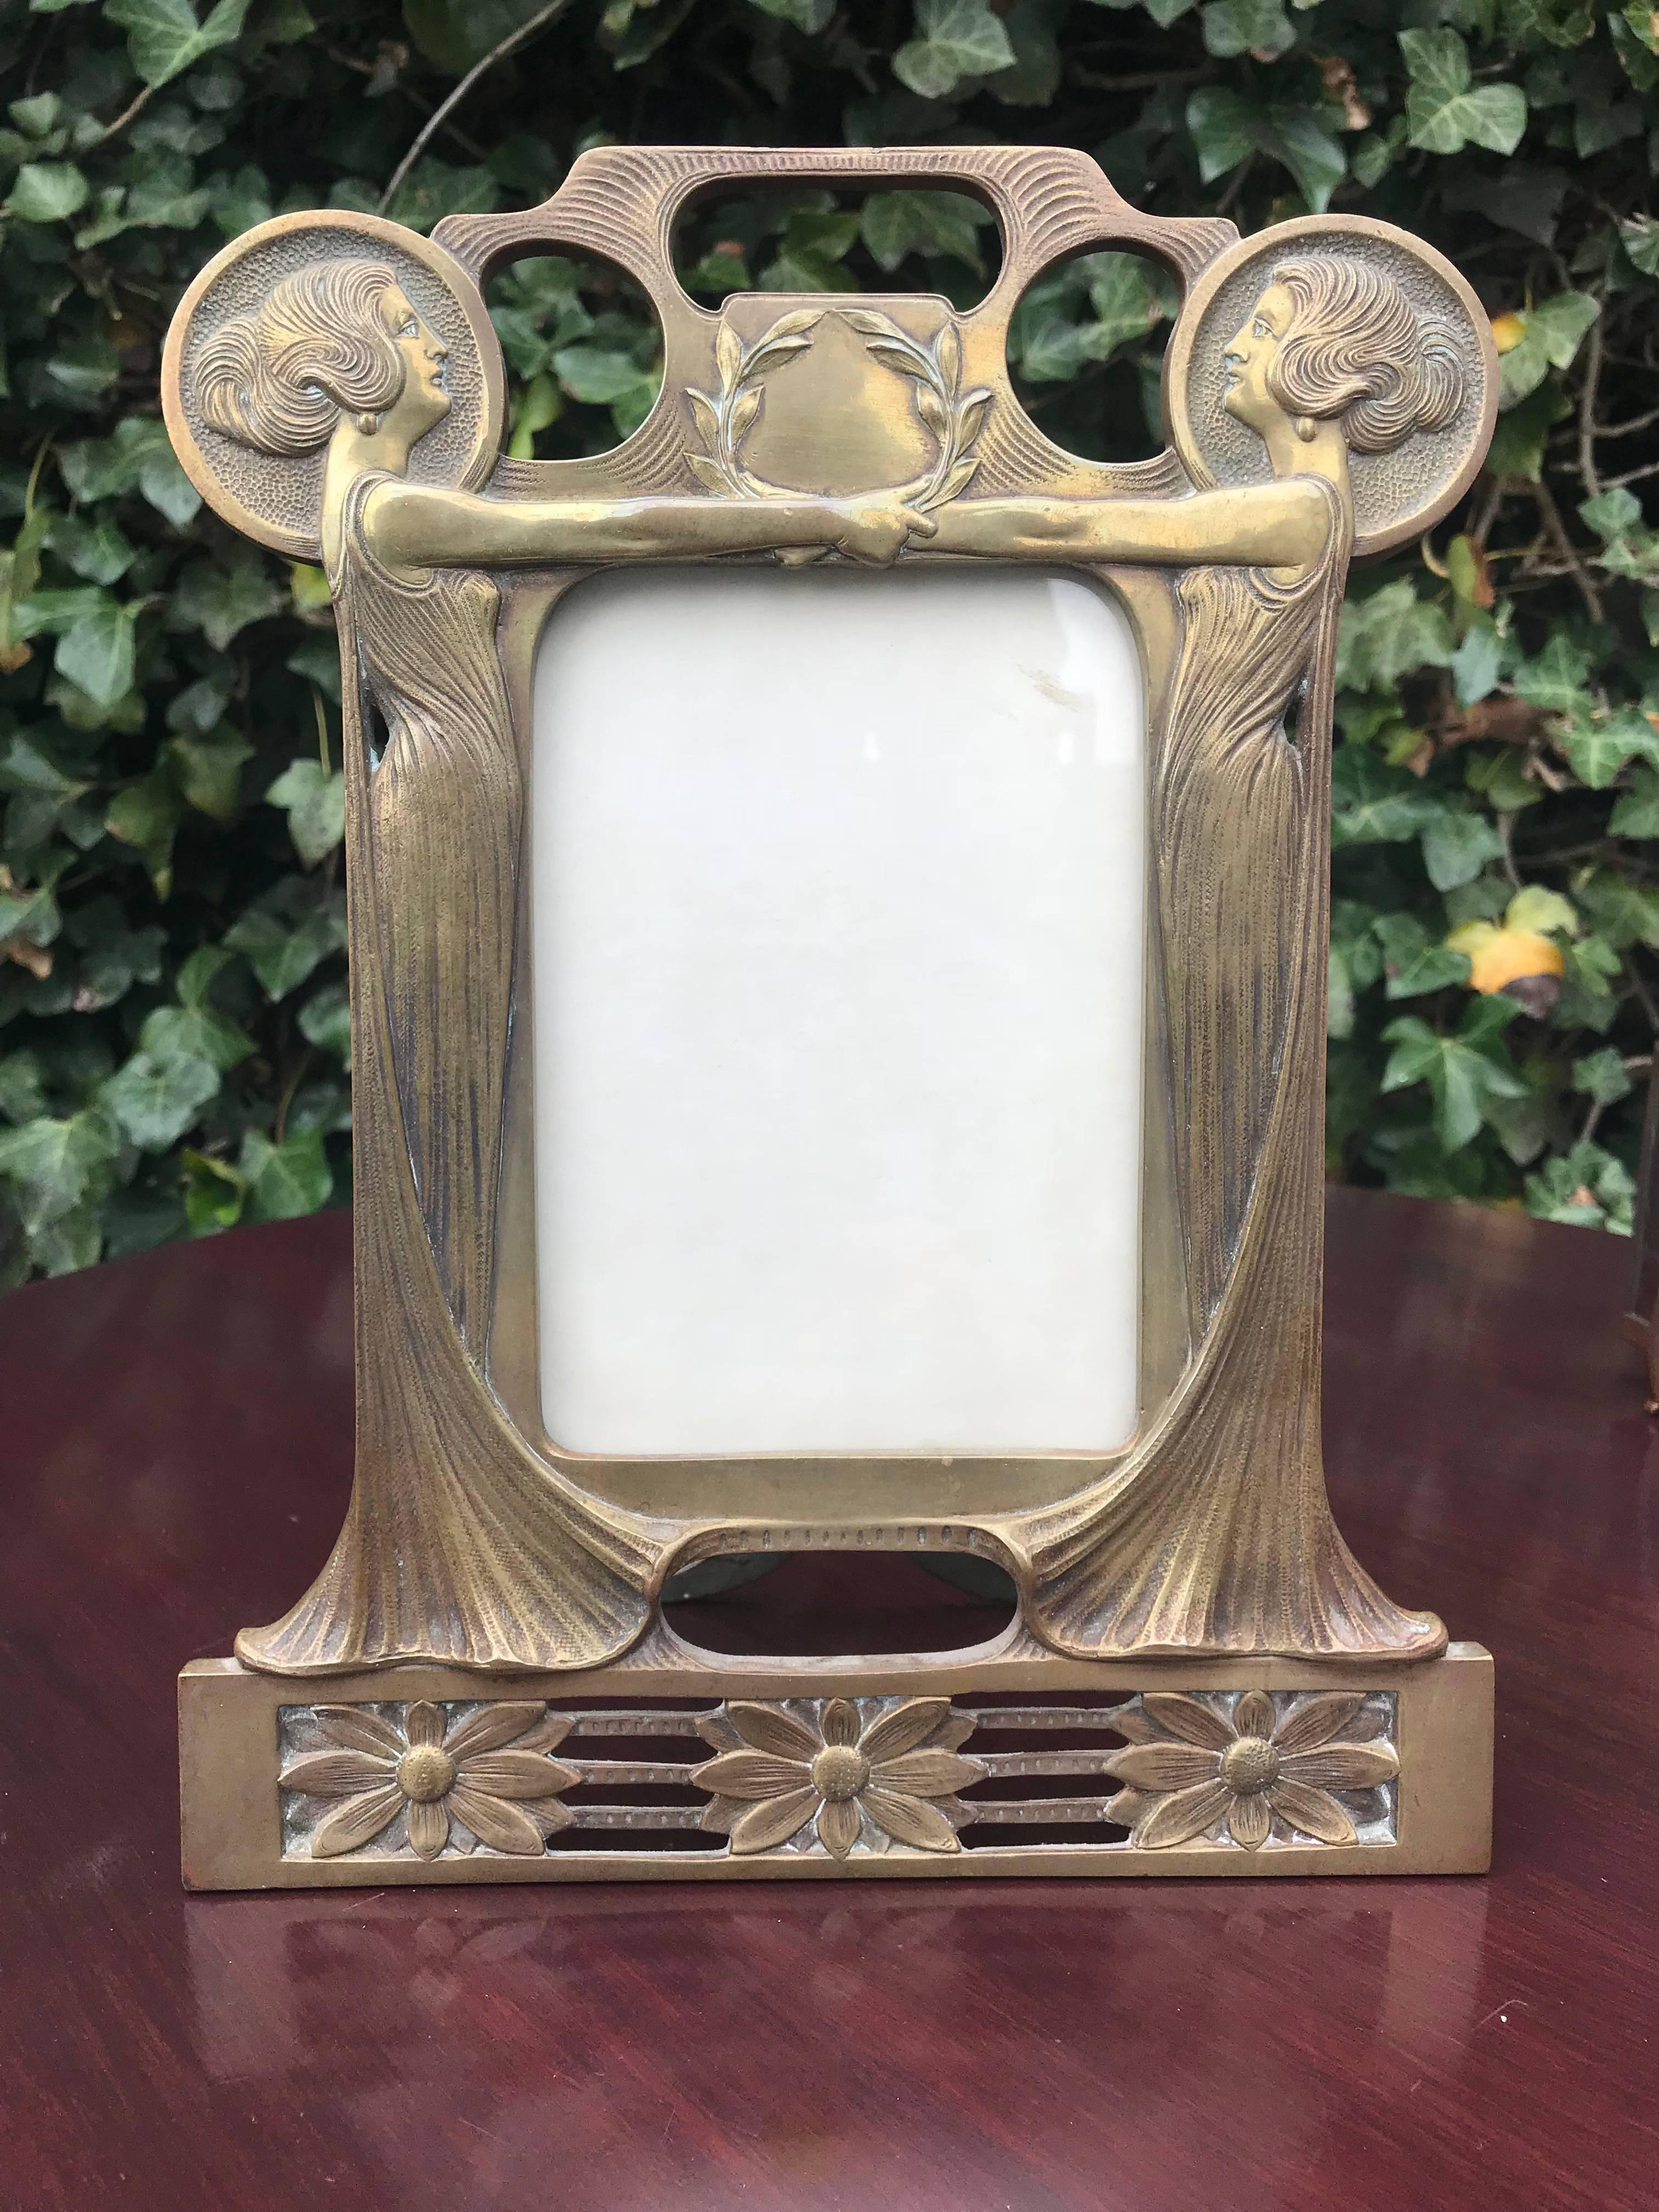 Gorgeous, meaningful and decorative fine art picture frame.

This early 1900s Art Nouveau picture frame in the style of Alfons Mucha is a wonderful sight to see. Incorporated in this handcrafted frame are two stunning Art Nouveau ladies who,